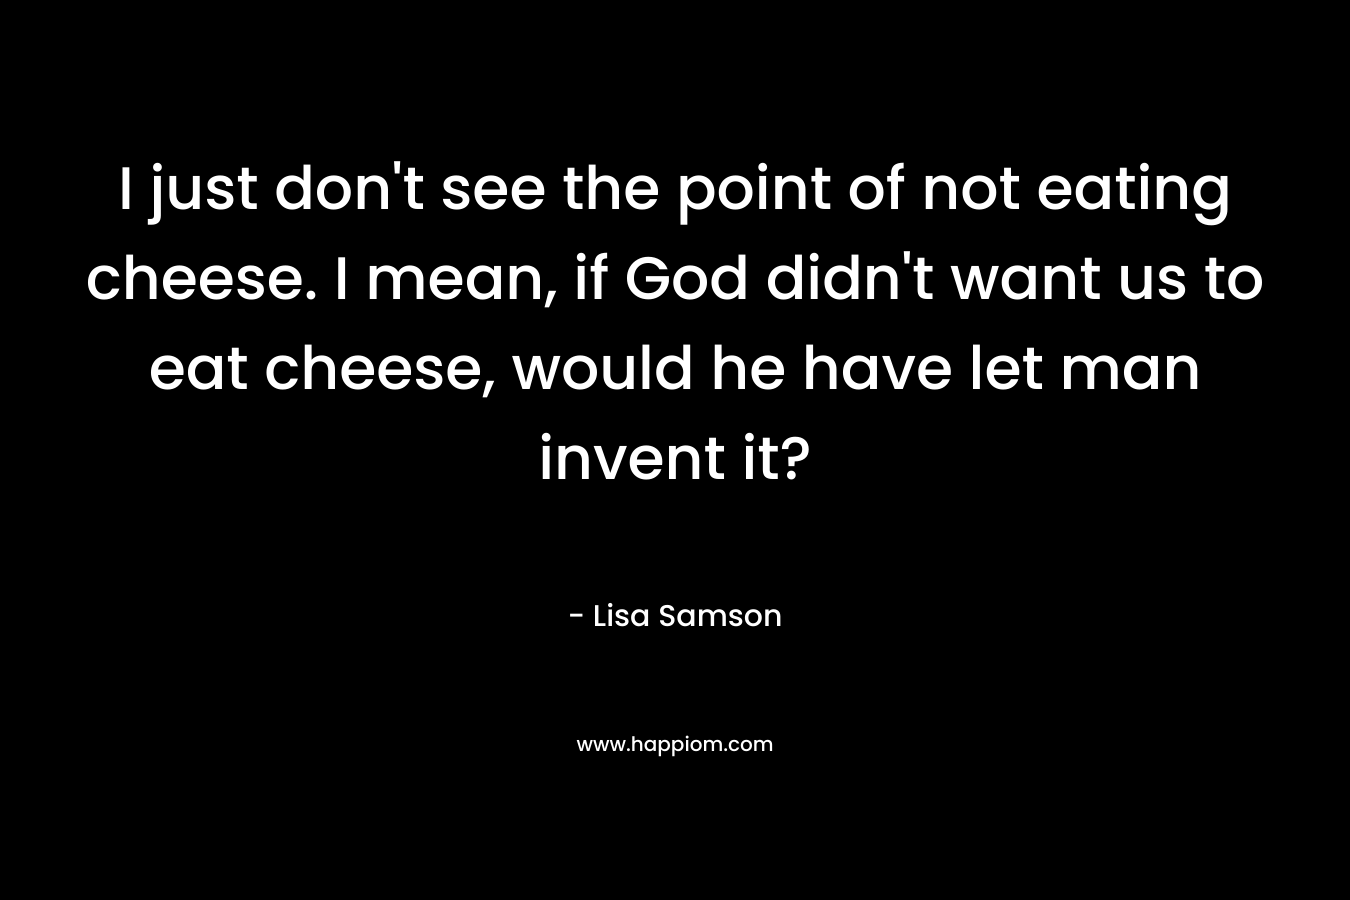 I just don't see the point of not eating cheese. I mean, if God didn't want us to eat cheese, would he have let man invent it?